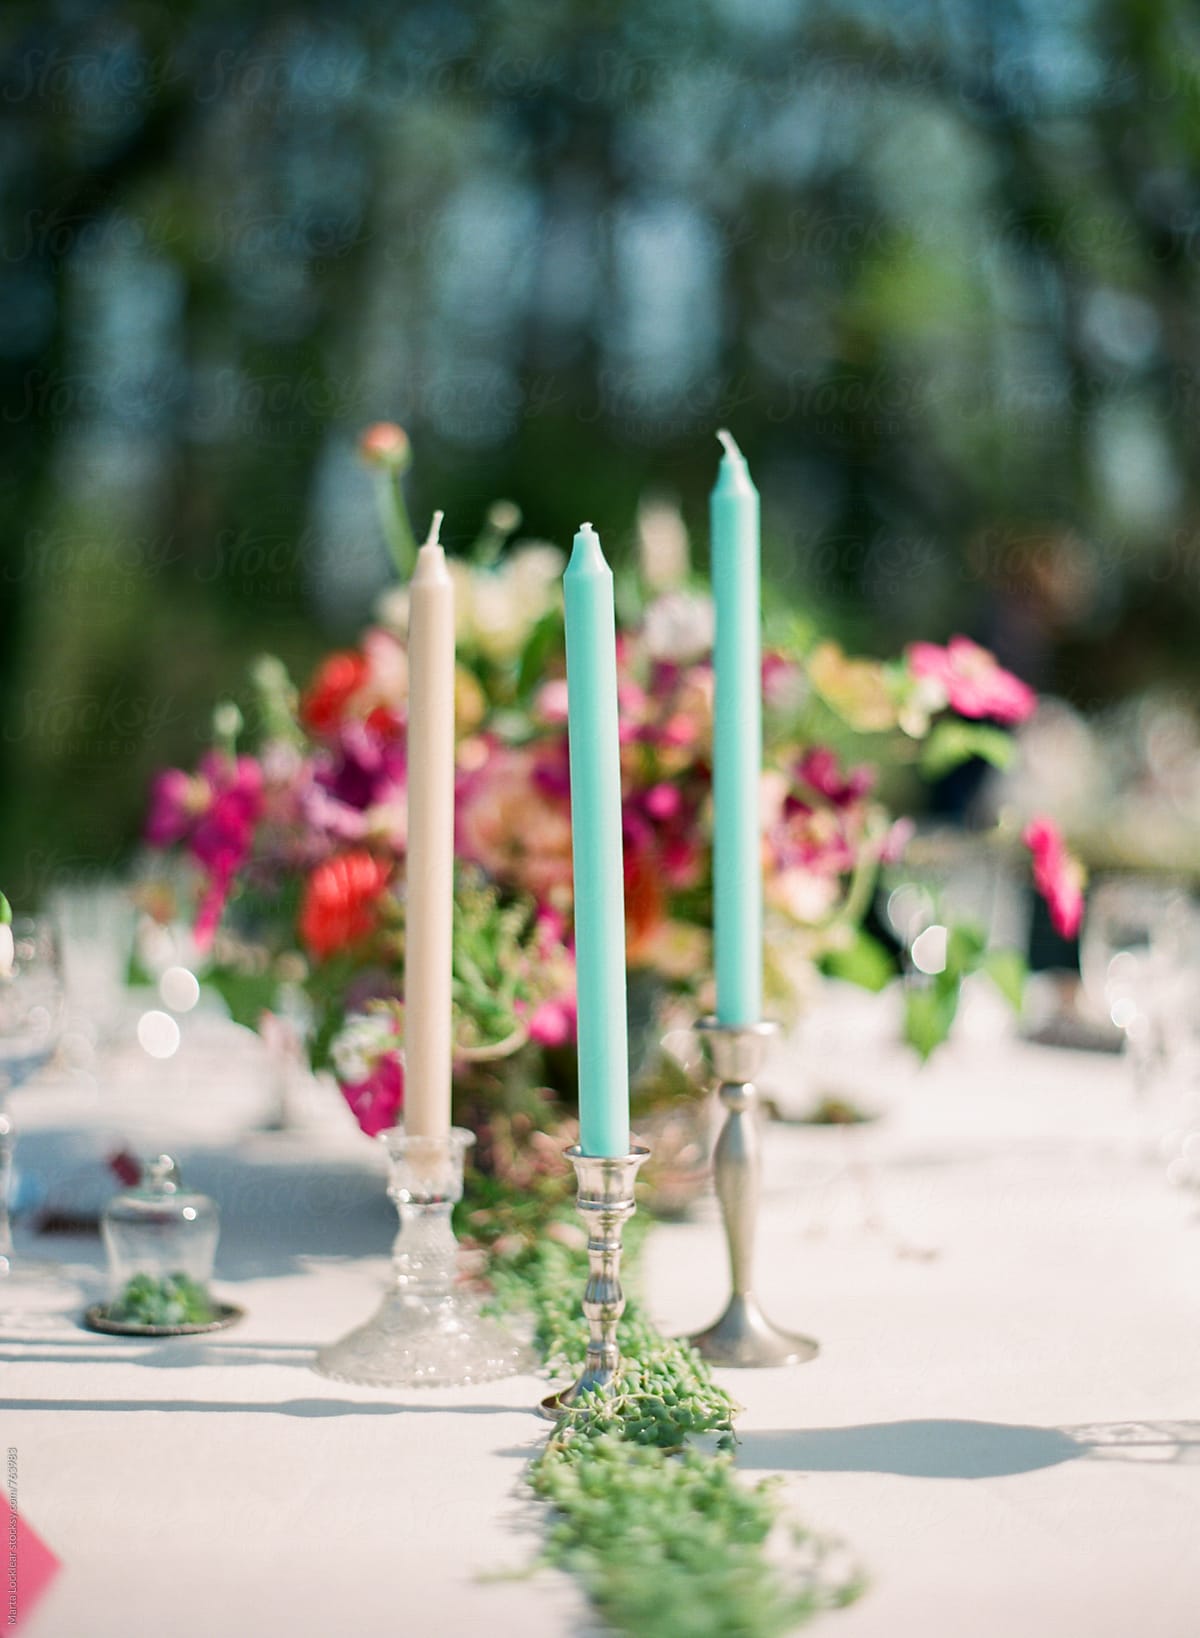 Candles on a formal dinner table